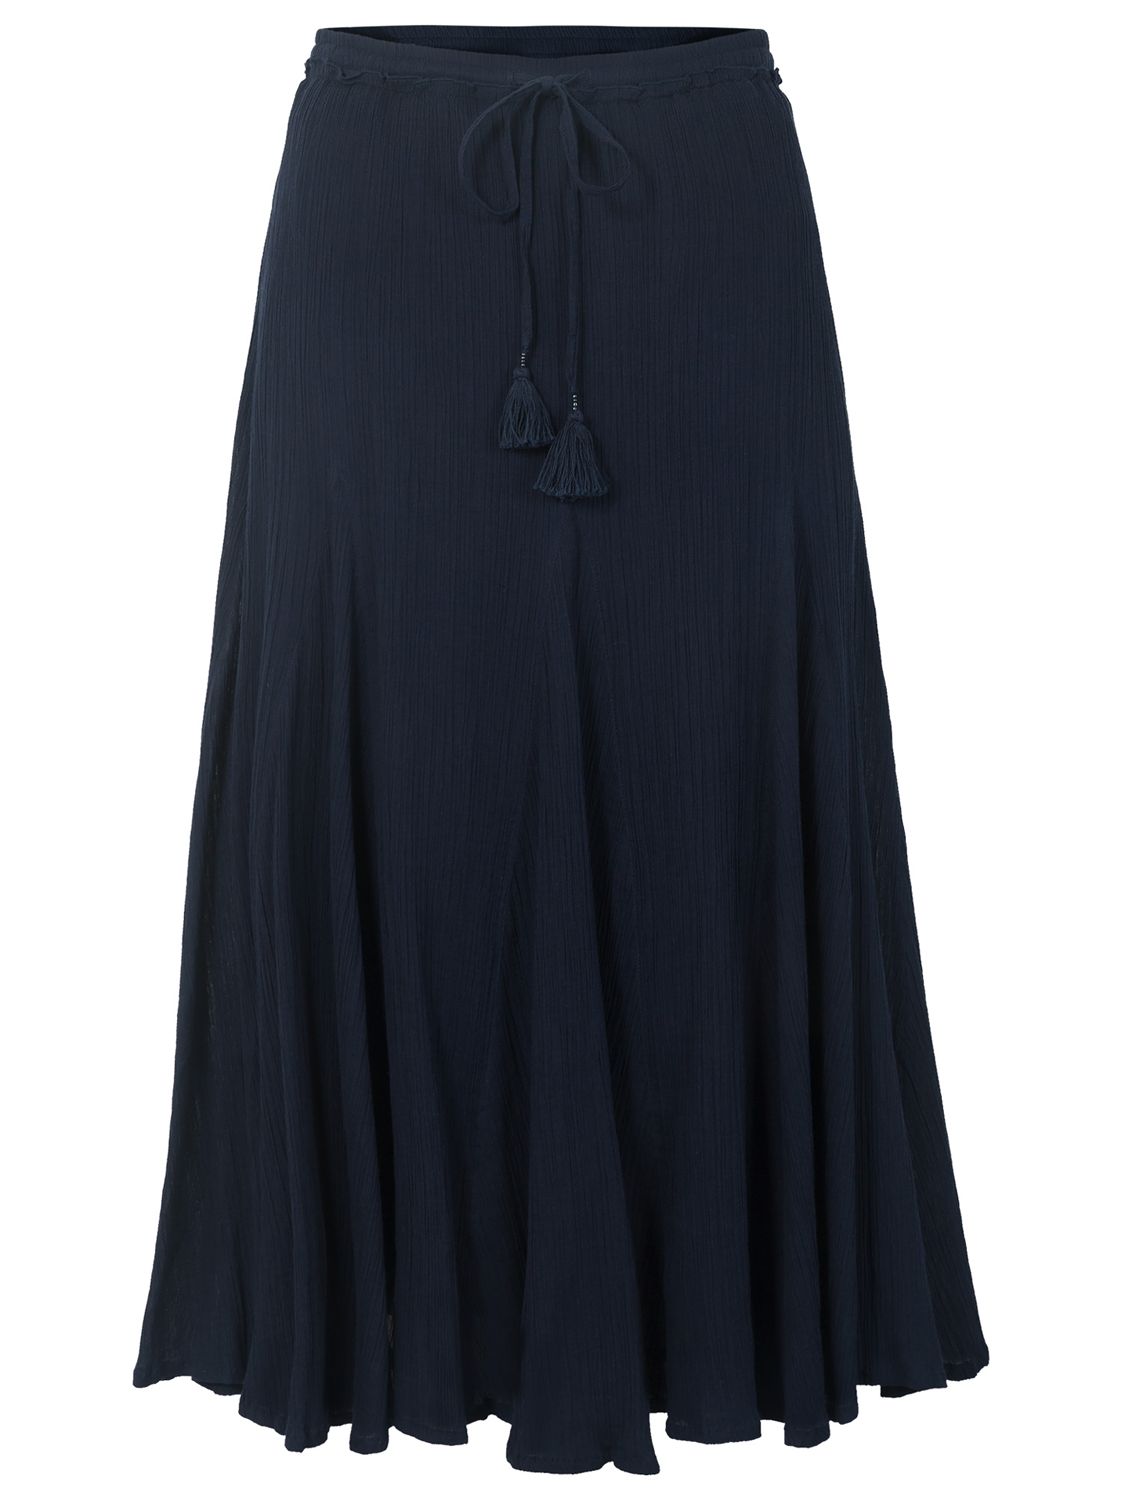 East Cheesecloth Crinkle Skirt, Indigo at John Lewis & Partners